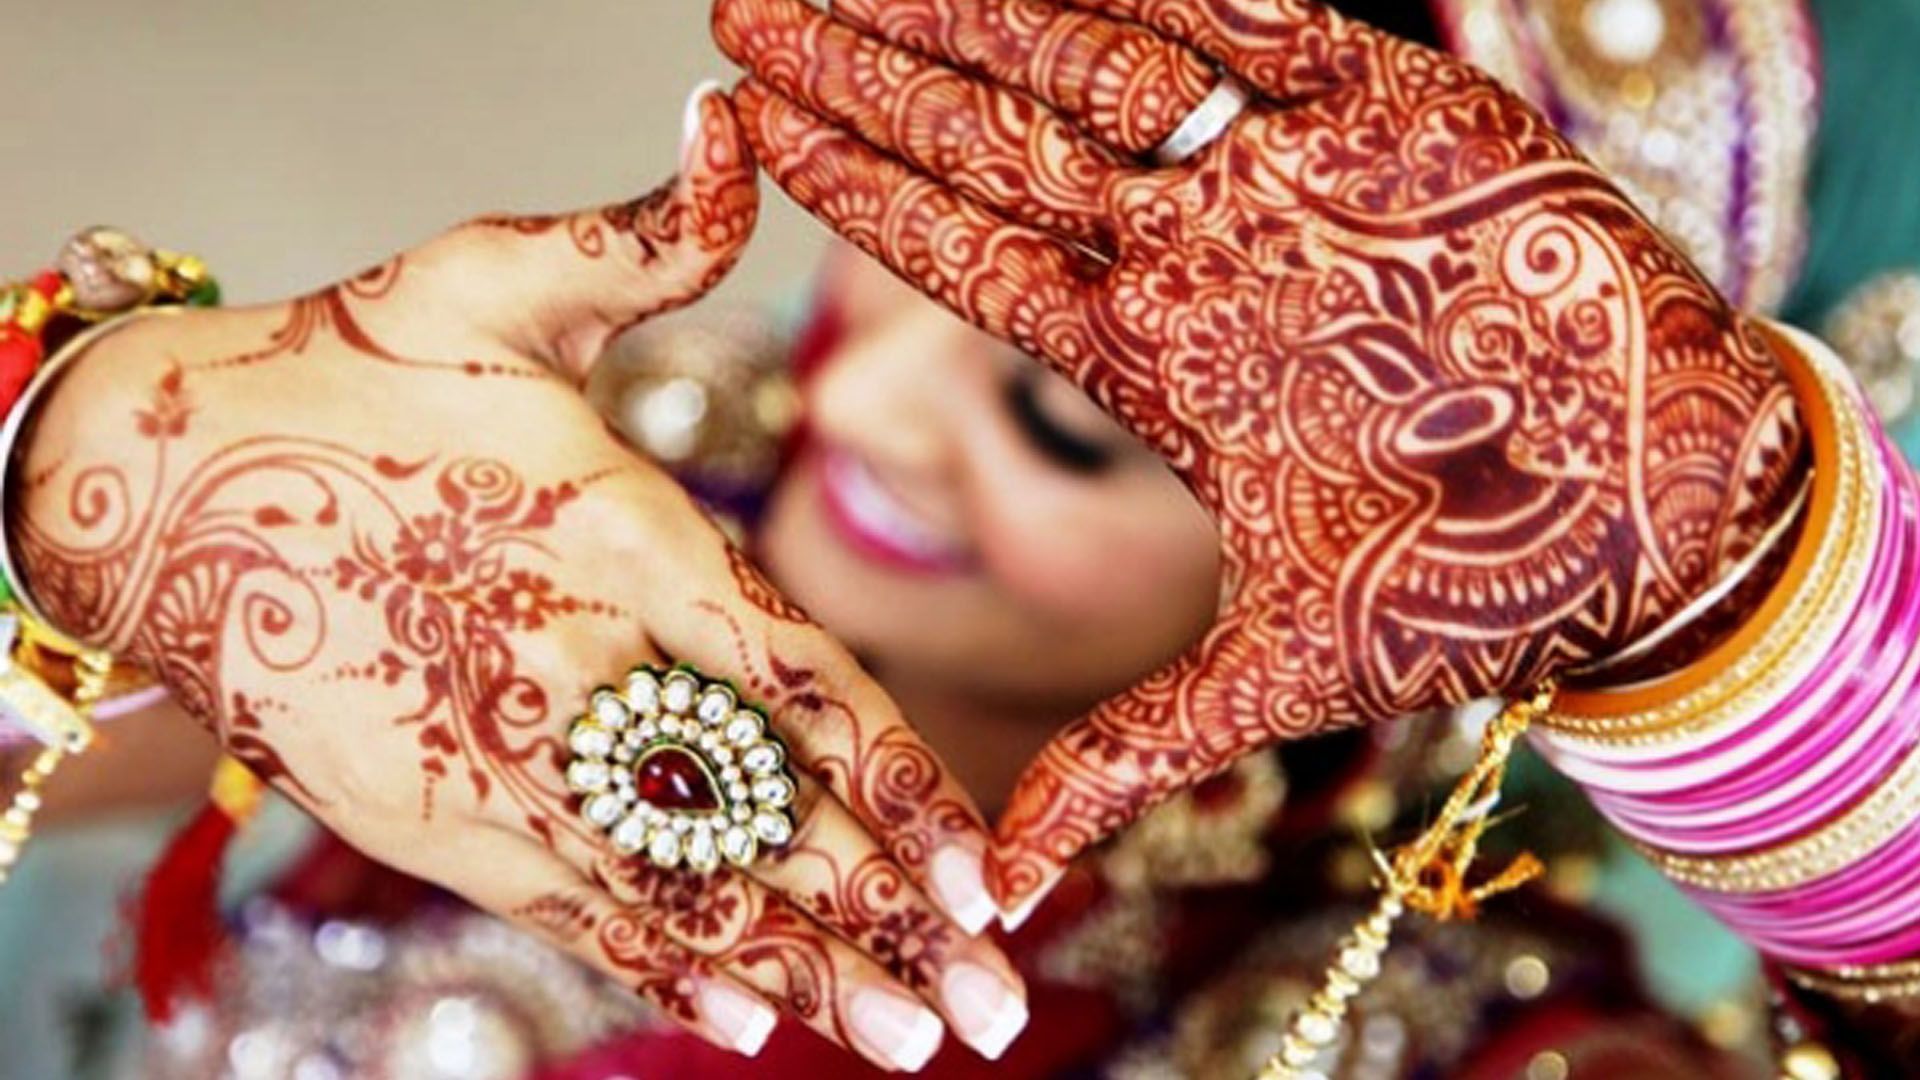 13800 Indian Bride Stock Photos Pictures  RoyaltyFree Images  iStock   Indian bride and groom South indian bride Indian bride bangles